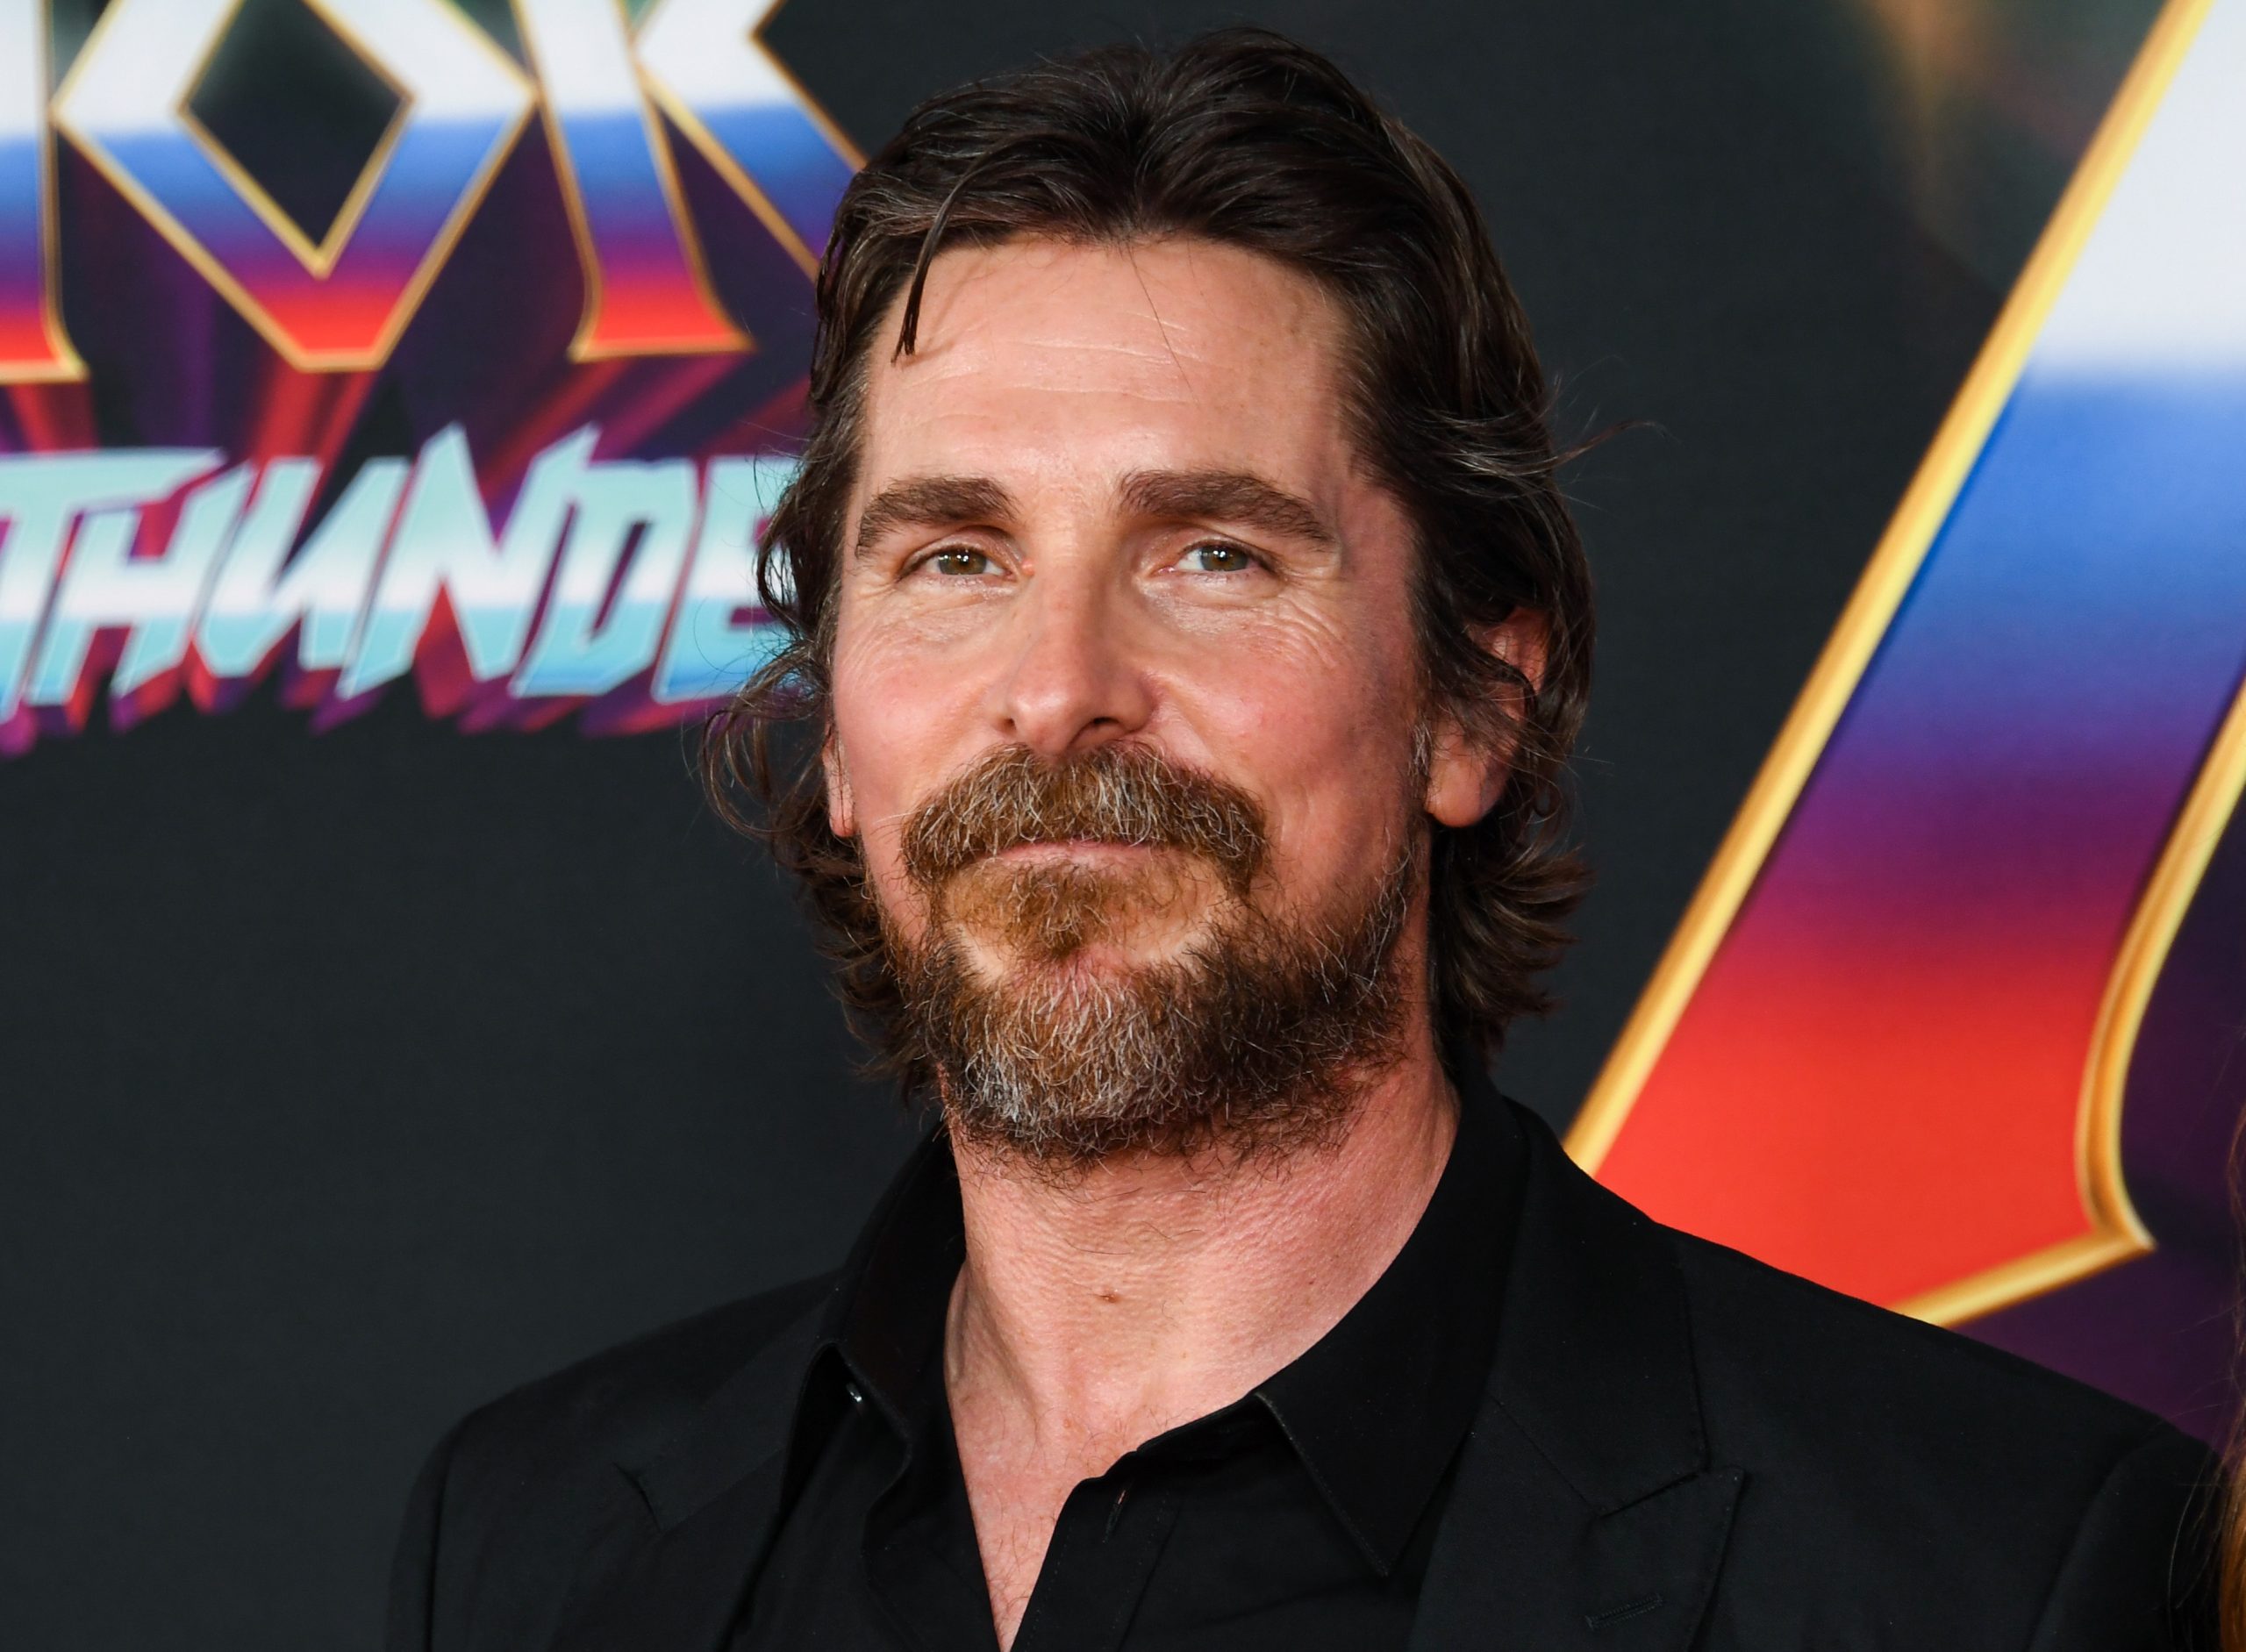 Christian Bale, who plays Gorr the God Butcher, attends the premiere of Thor: Love and Thunder